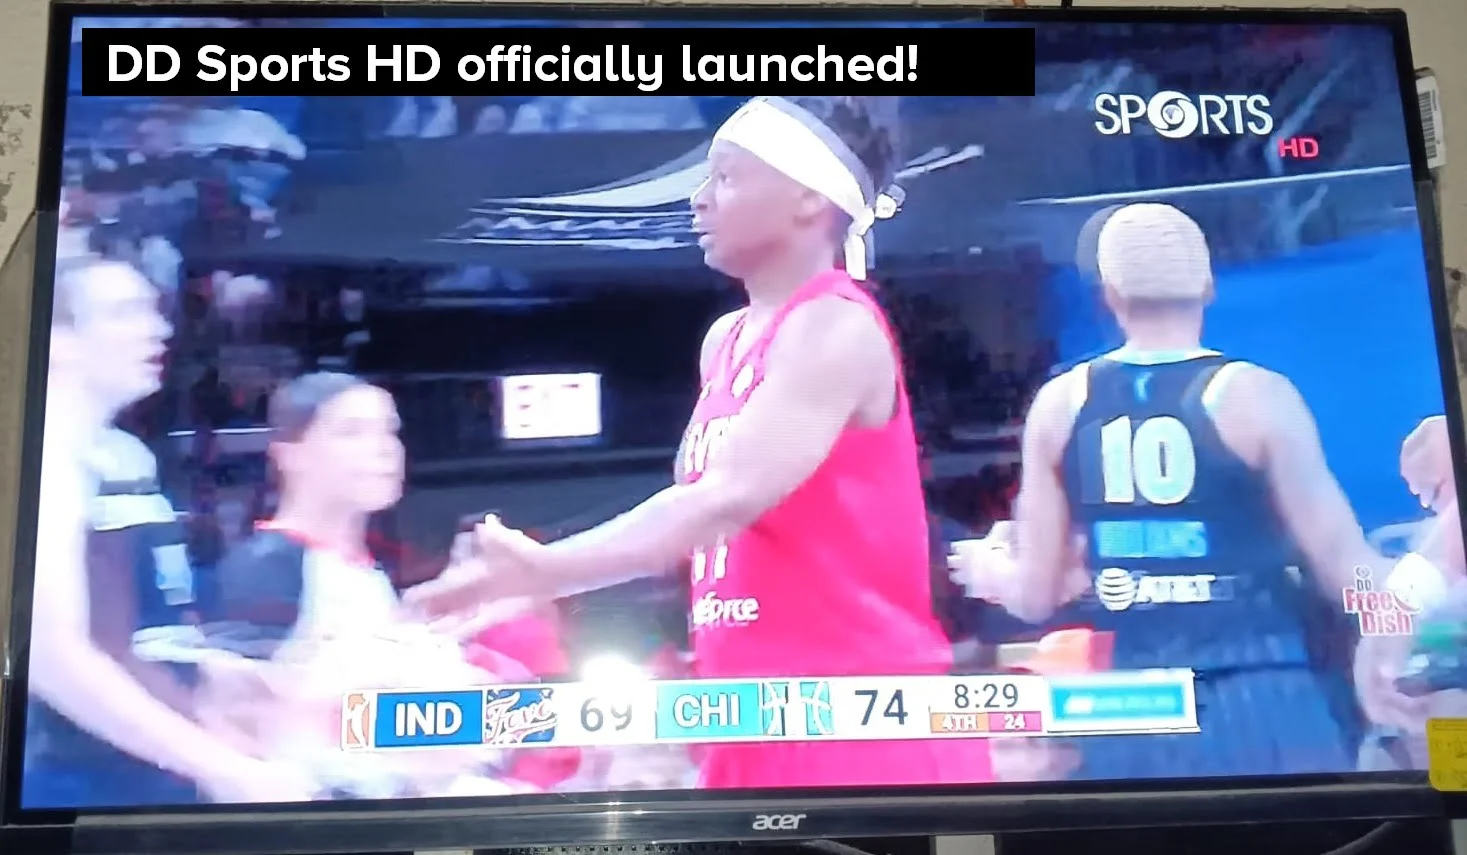 Doordarshan officially launches DD Sports HD, Indias first free-to-air HD sports channel